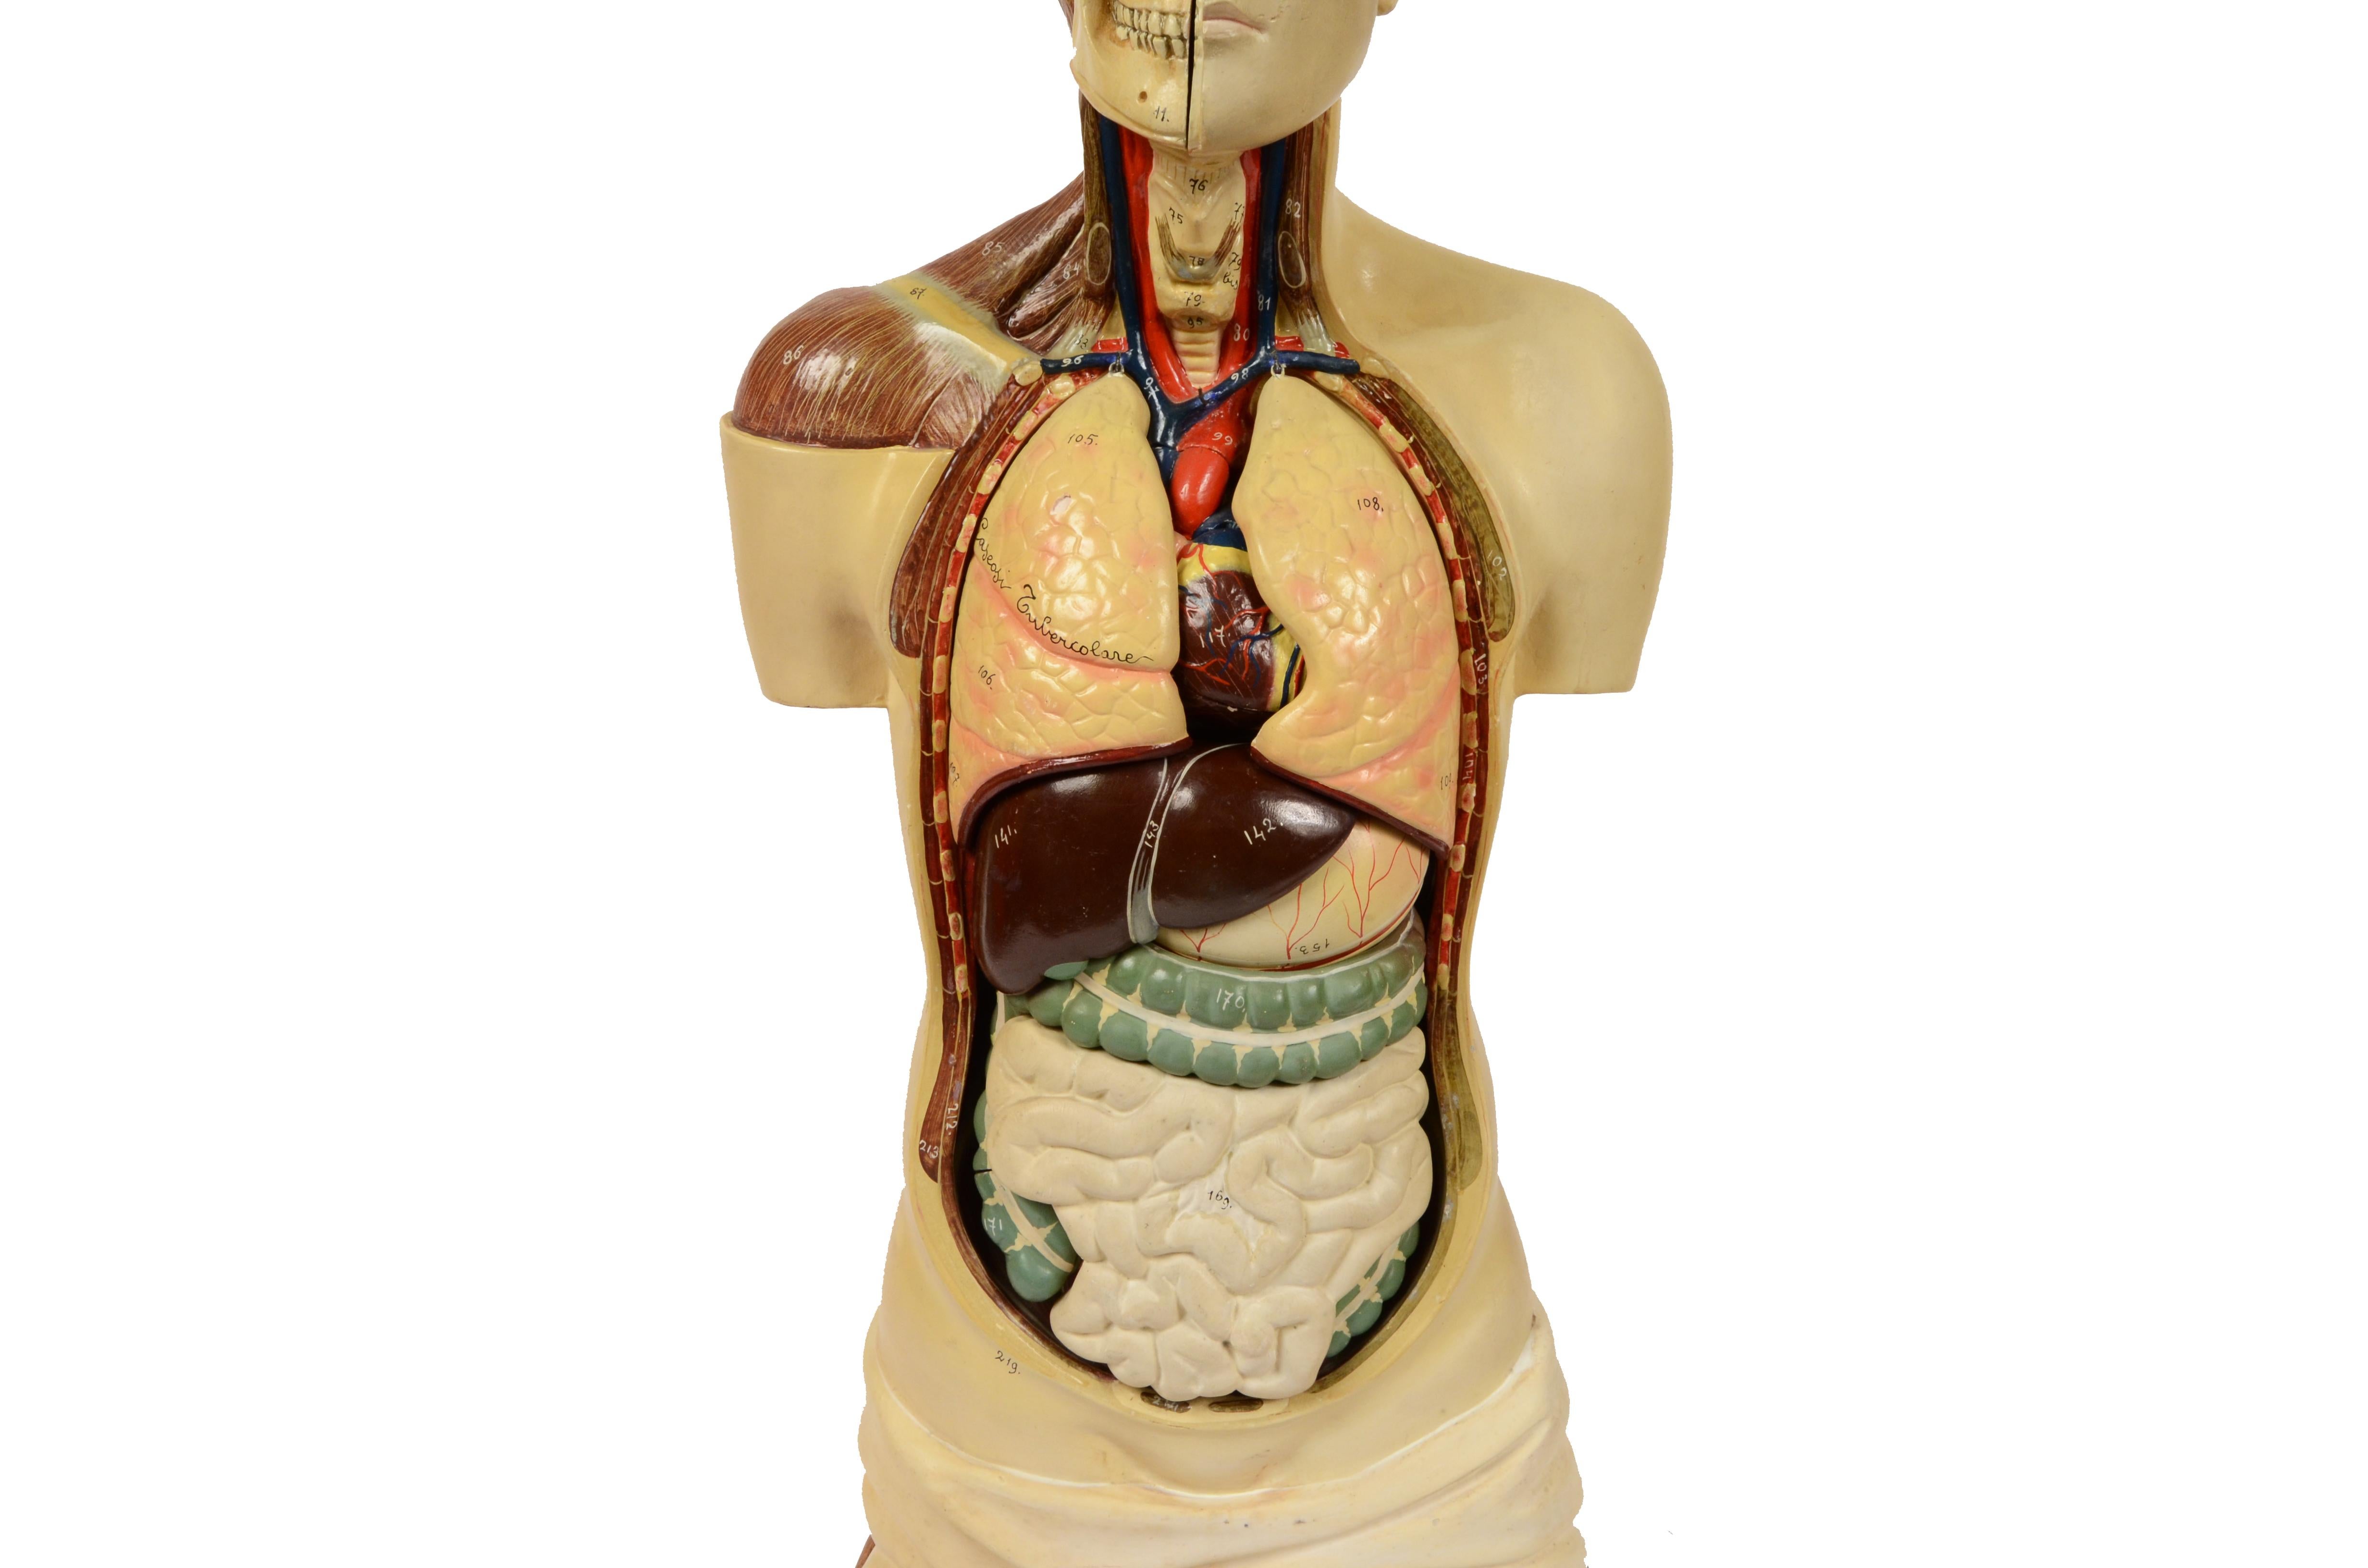 Early 20th Century 1900s Didactic Anatomical Torso with Removable Organs Scale 1:1 A. Fumeo Milano